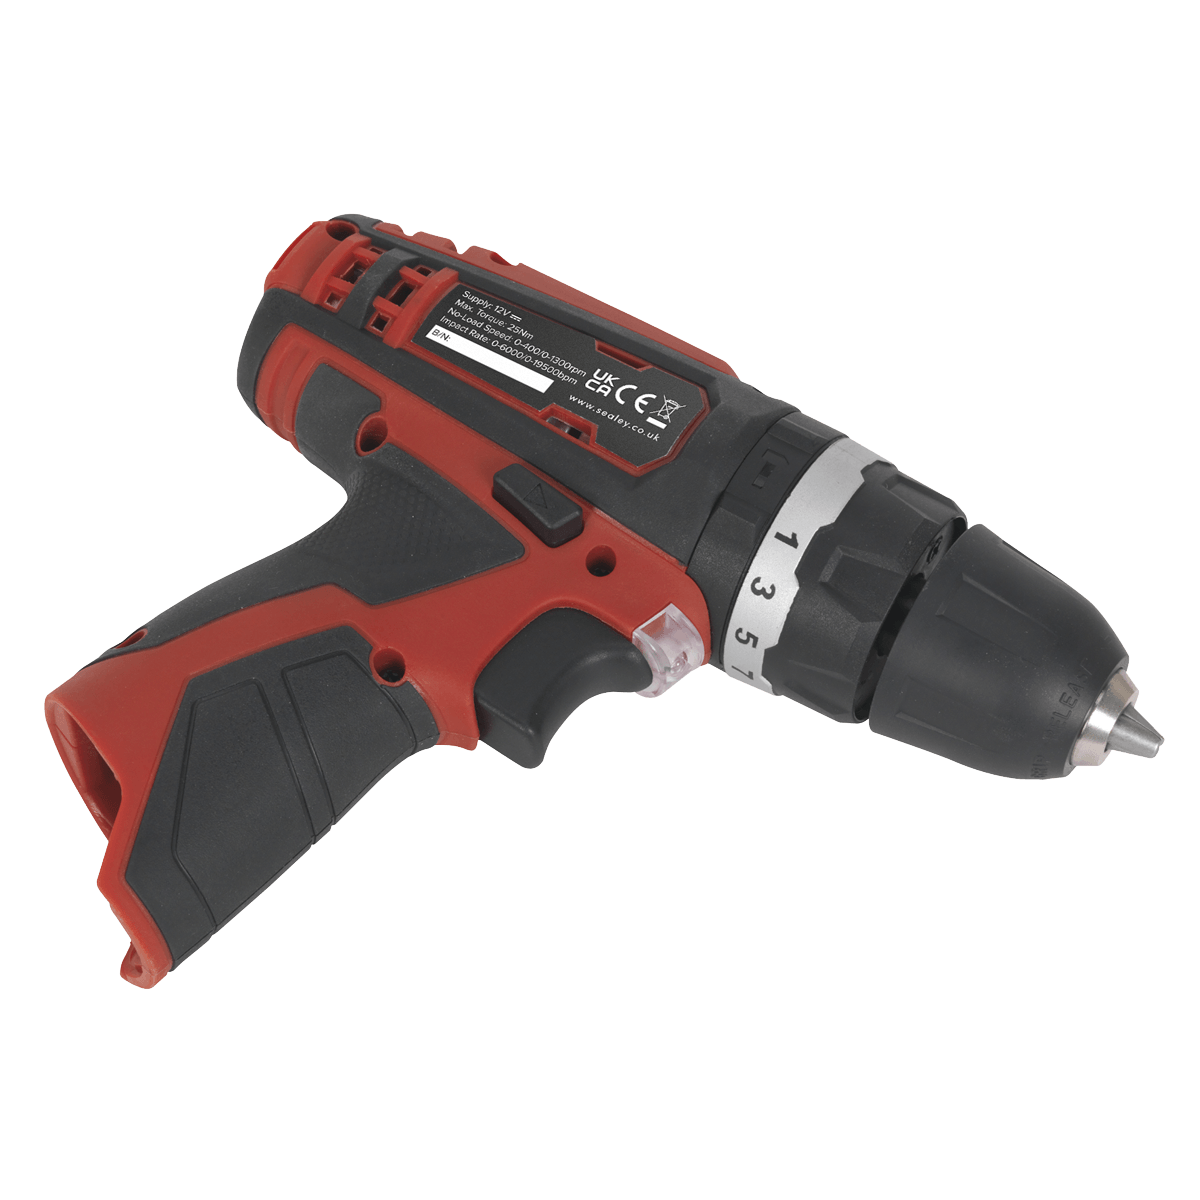 Sealey Cordless Combi Drill Ø10mm 12V SV12 Series - Body Only CP1201 - Tools 2U Direct SW